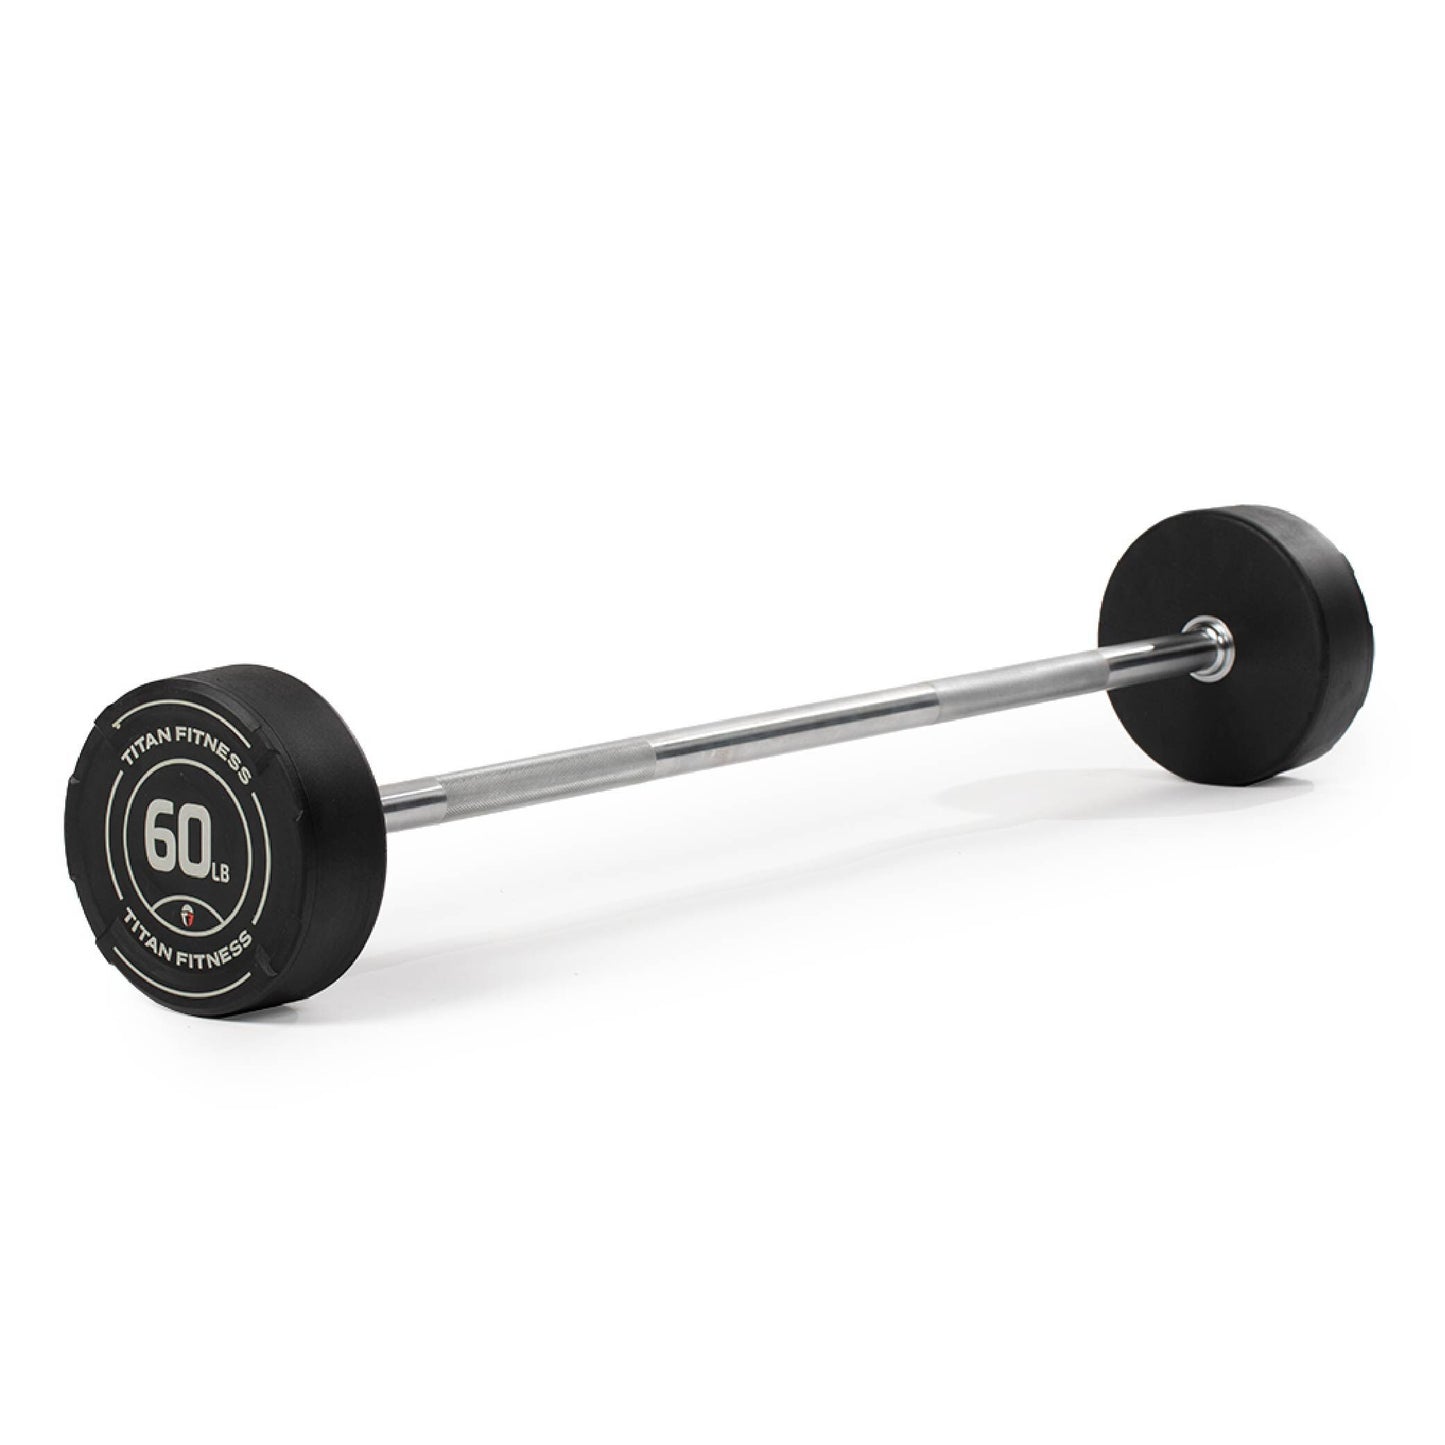 60 LB Straight Fixed Rubber Barbell - view 1